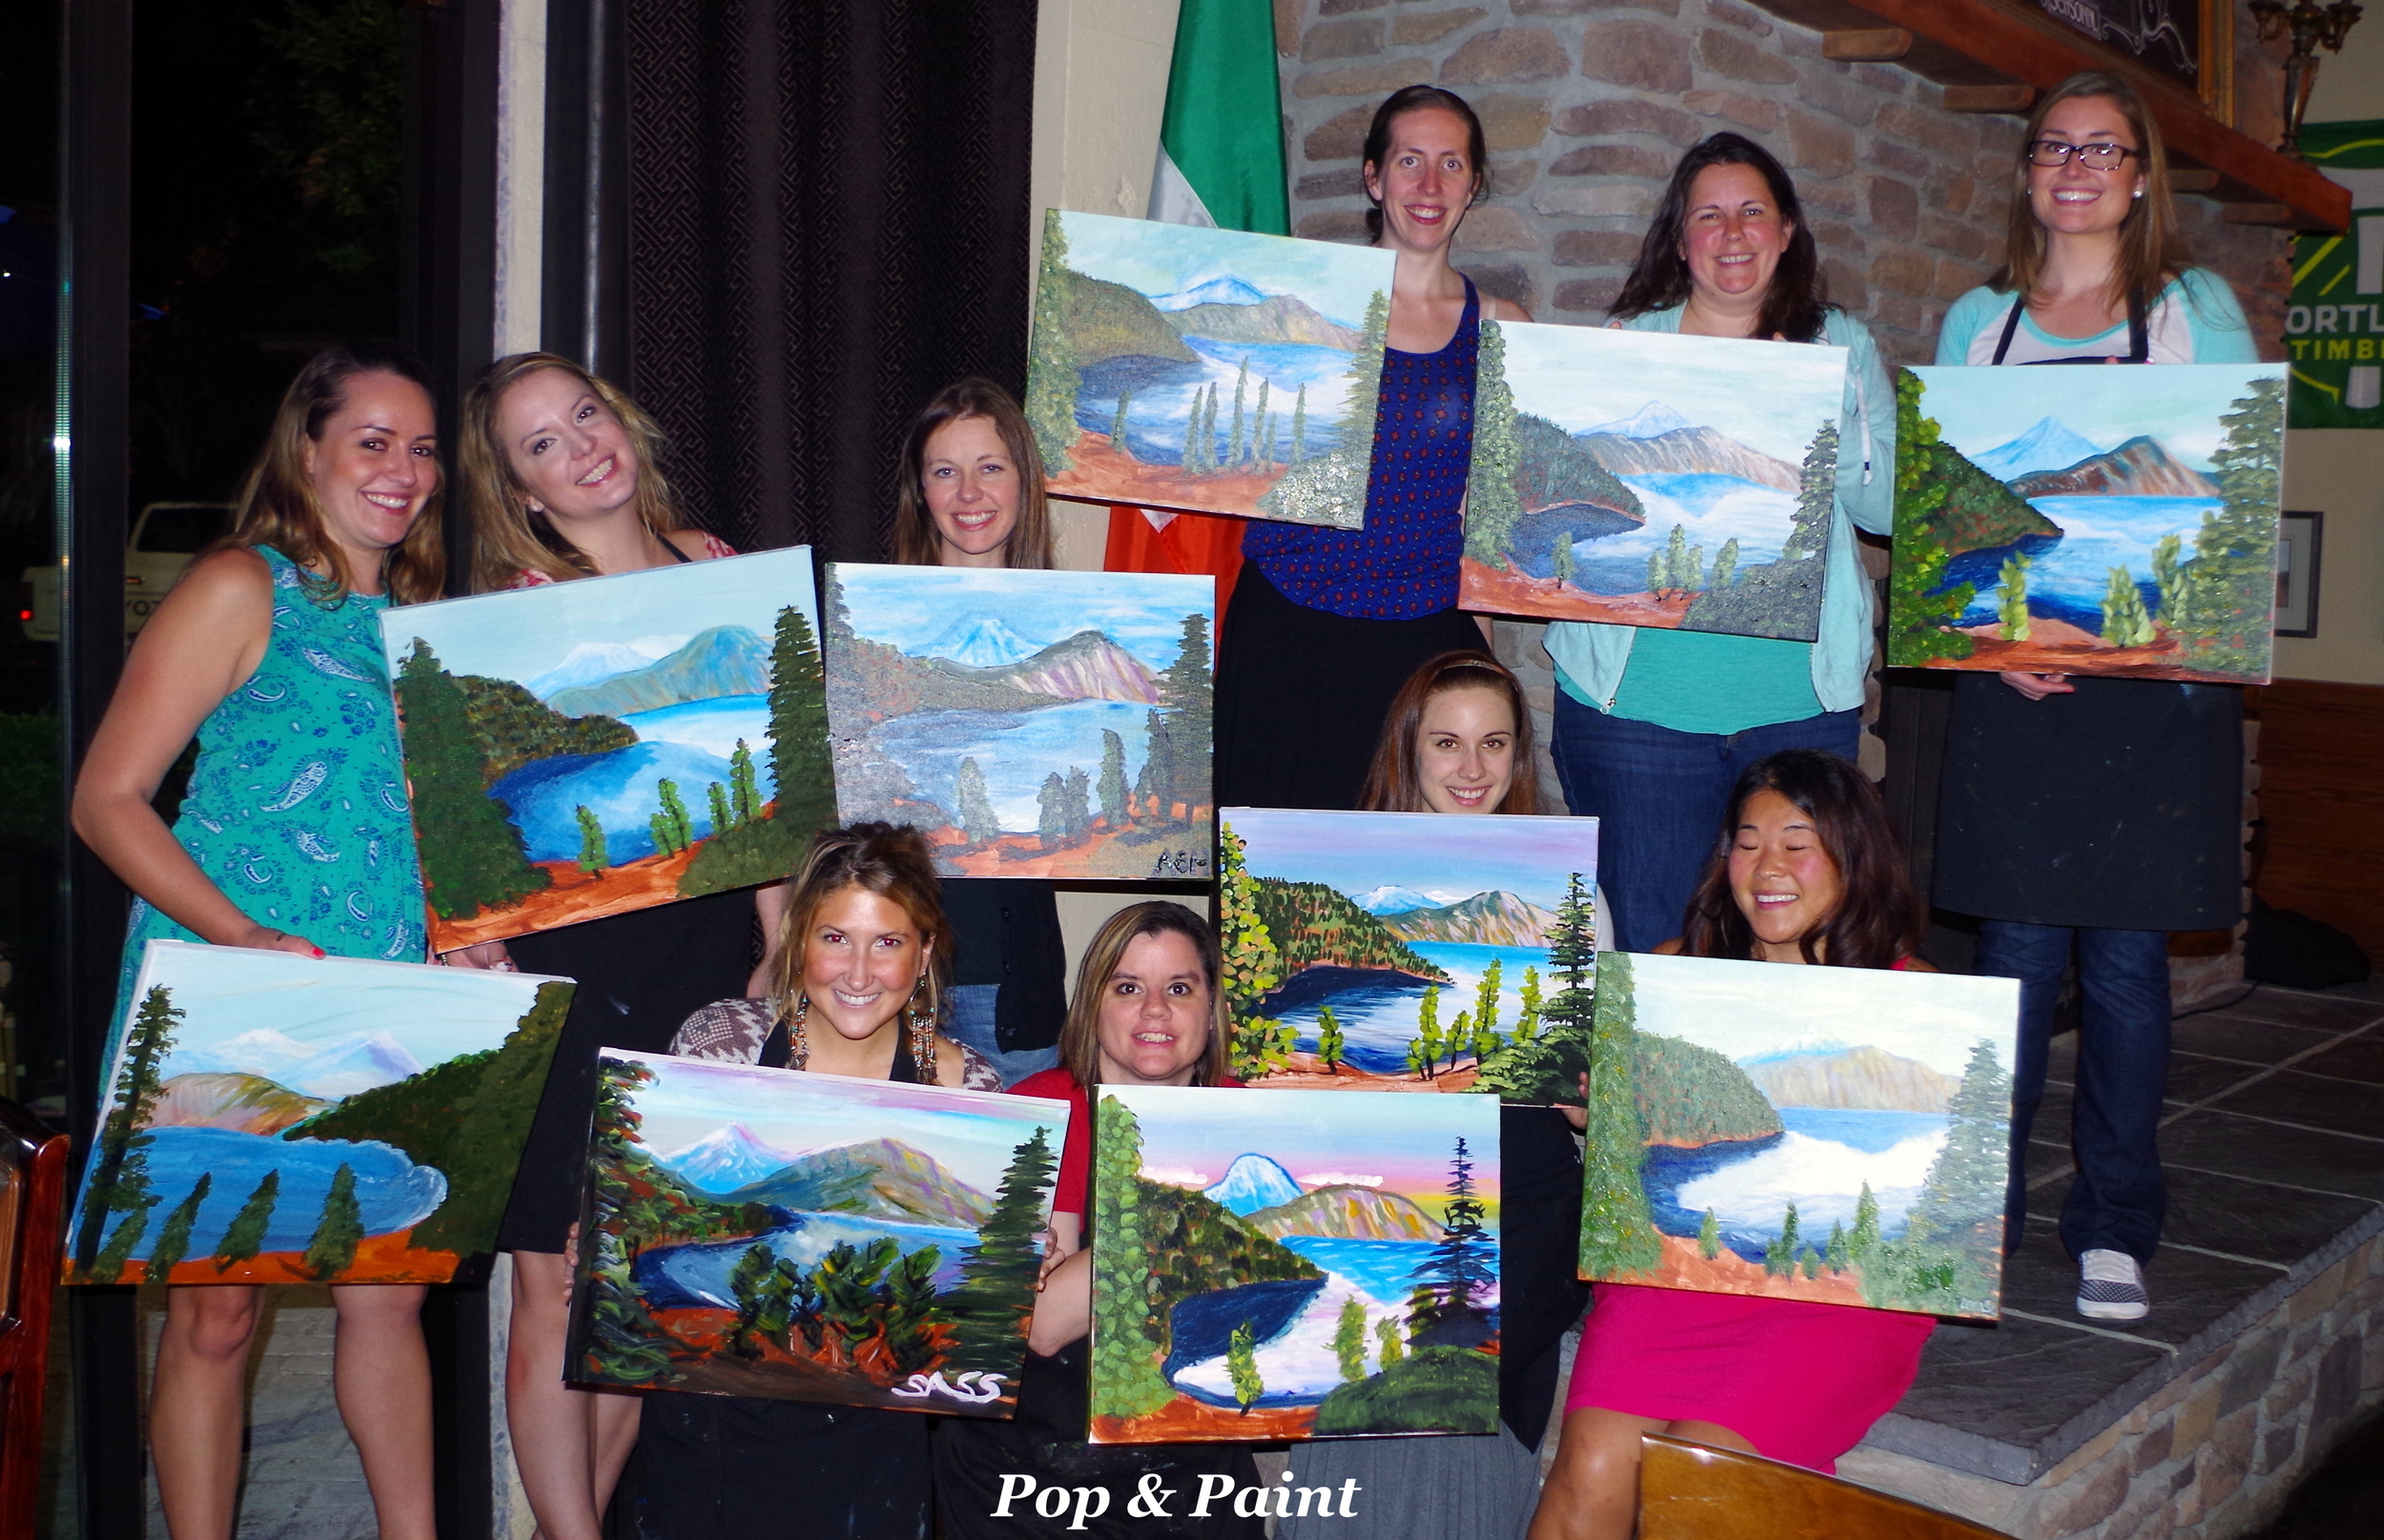 Beautiful paintings everyone!!  You all were a blast!